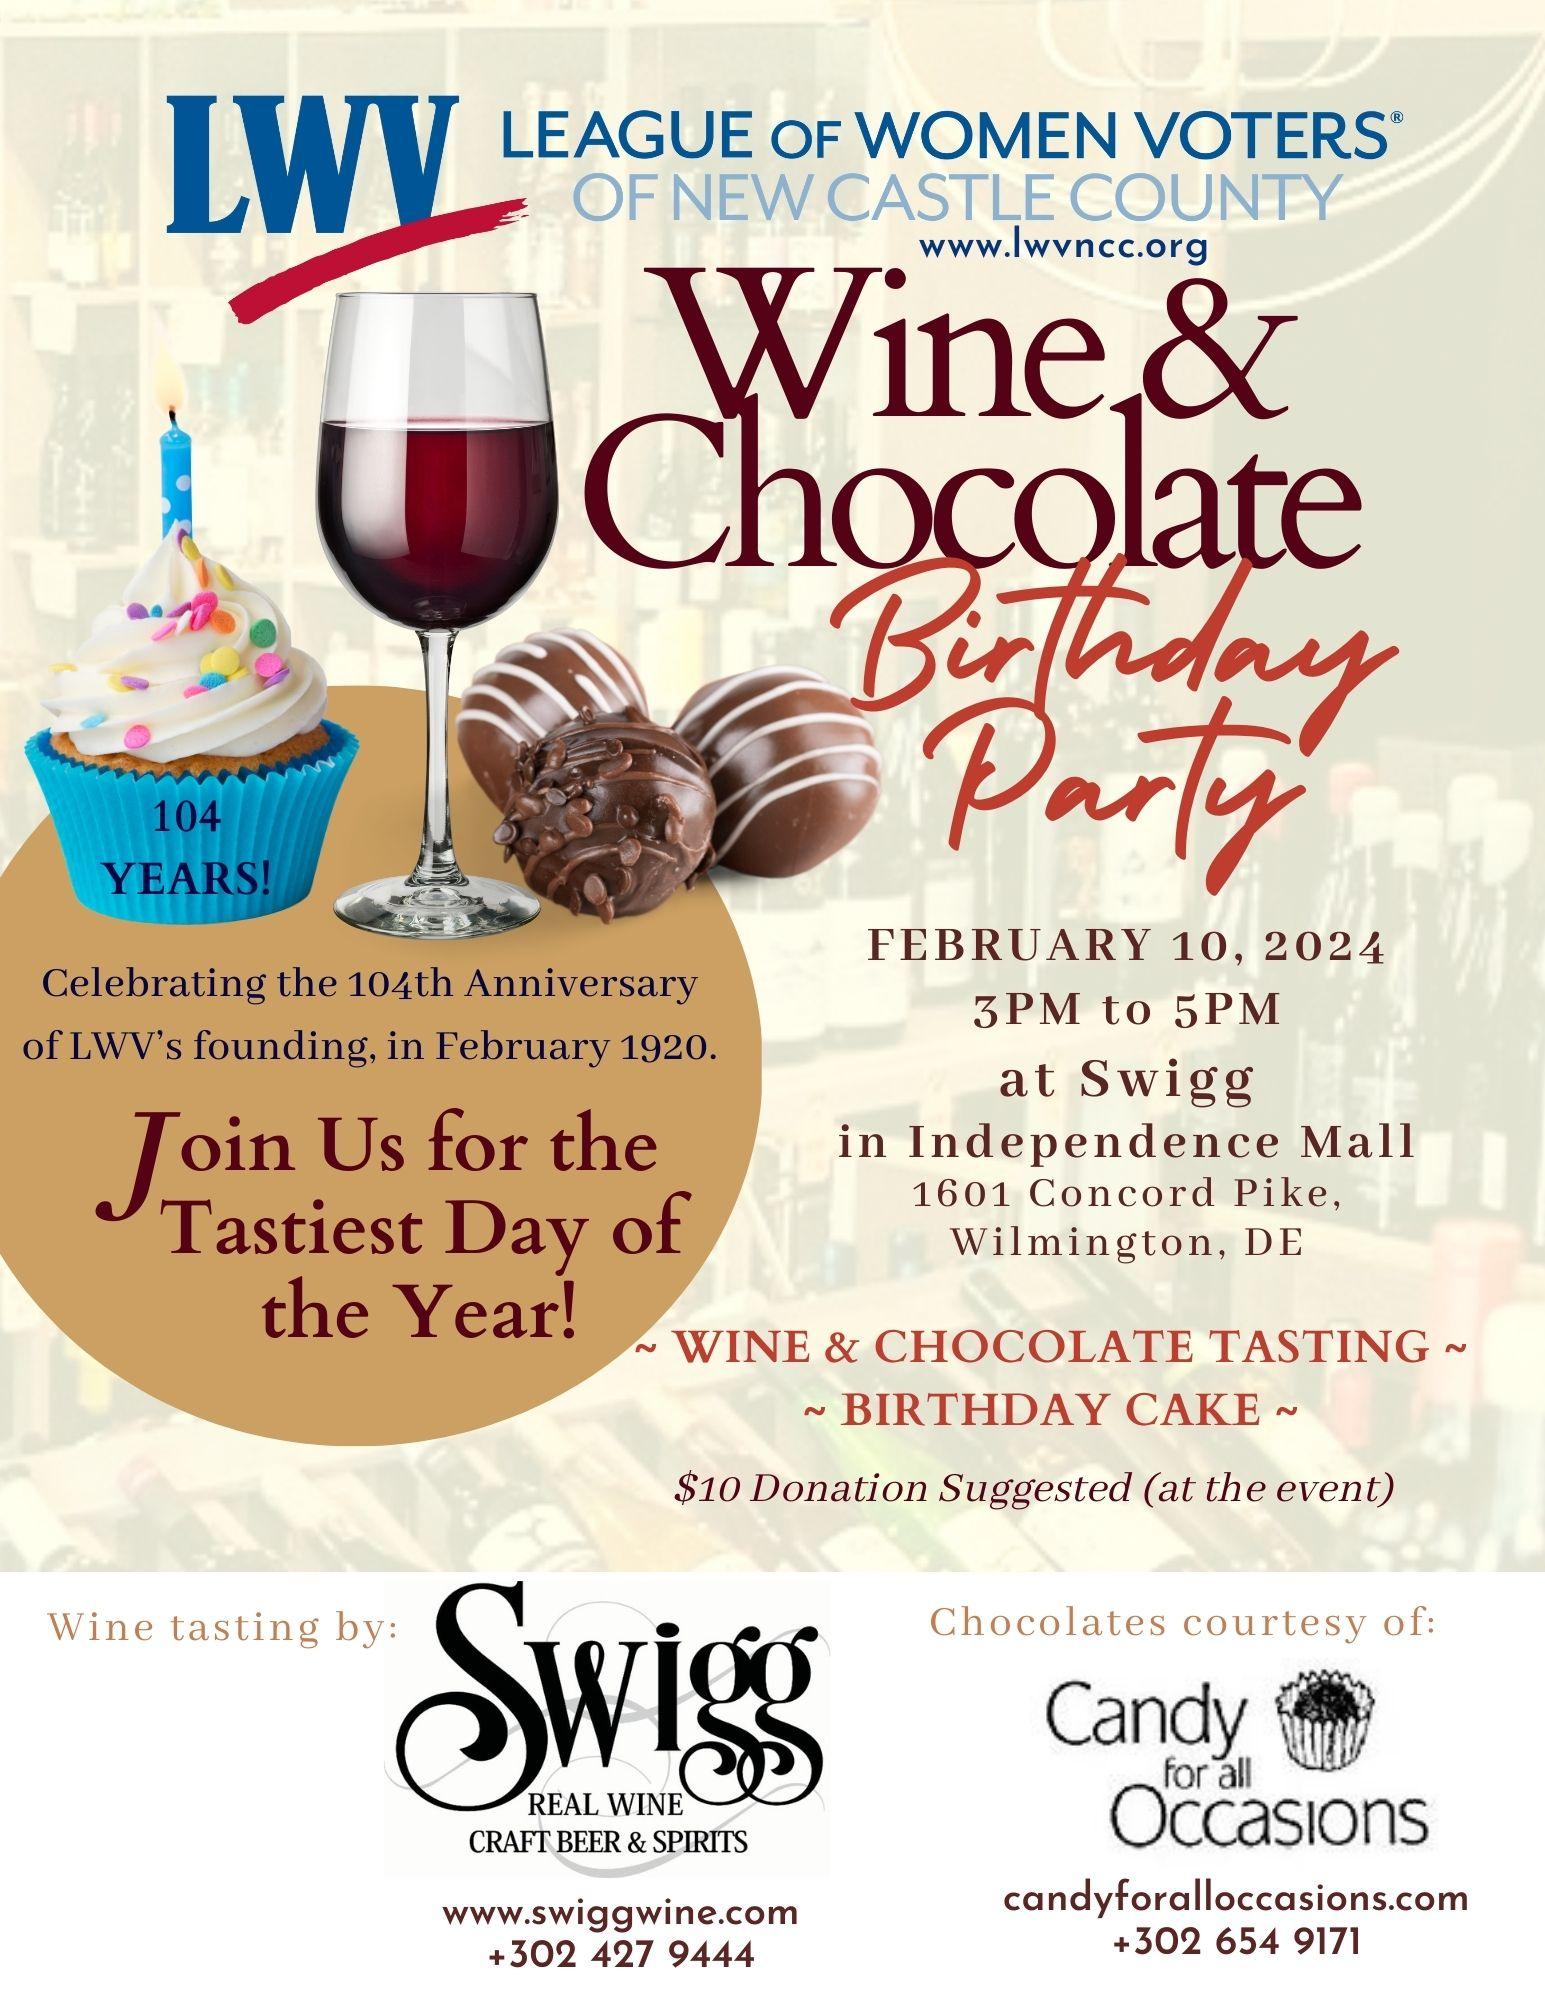 LWVNCC Wine & Chocolate Birthday Party full event flyer